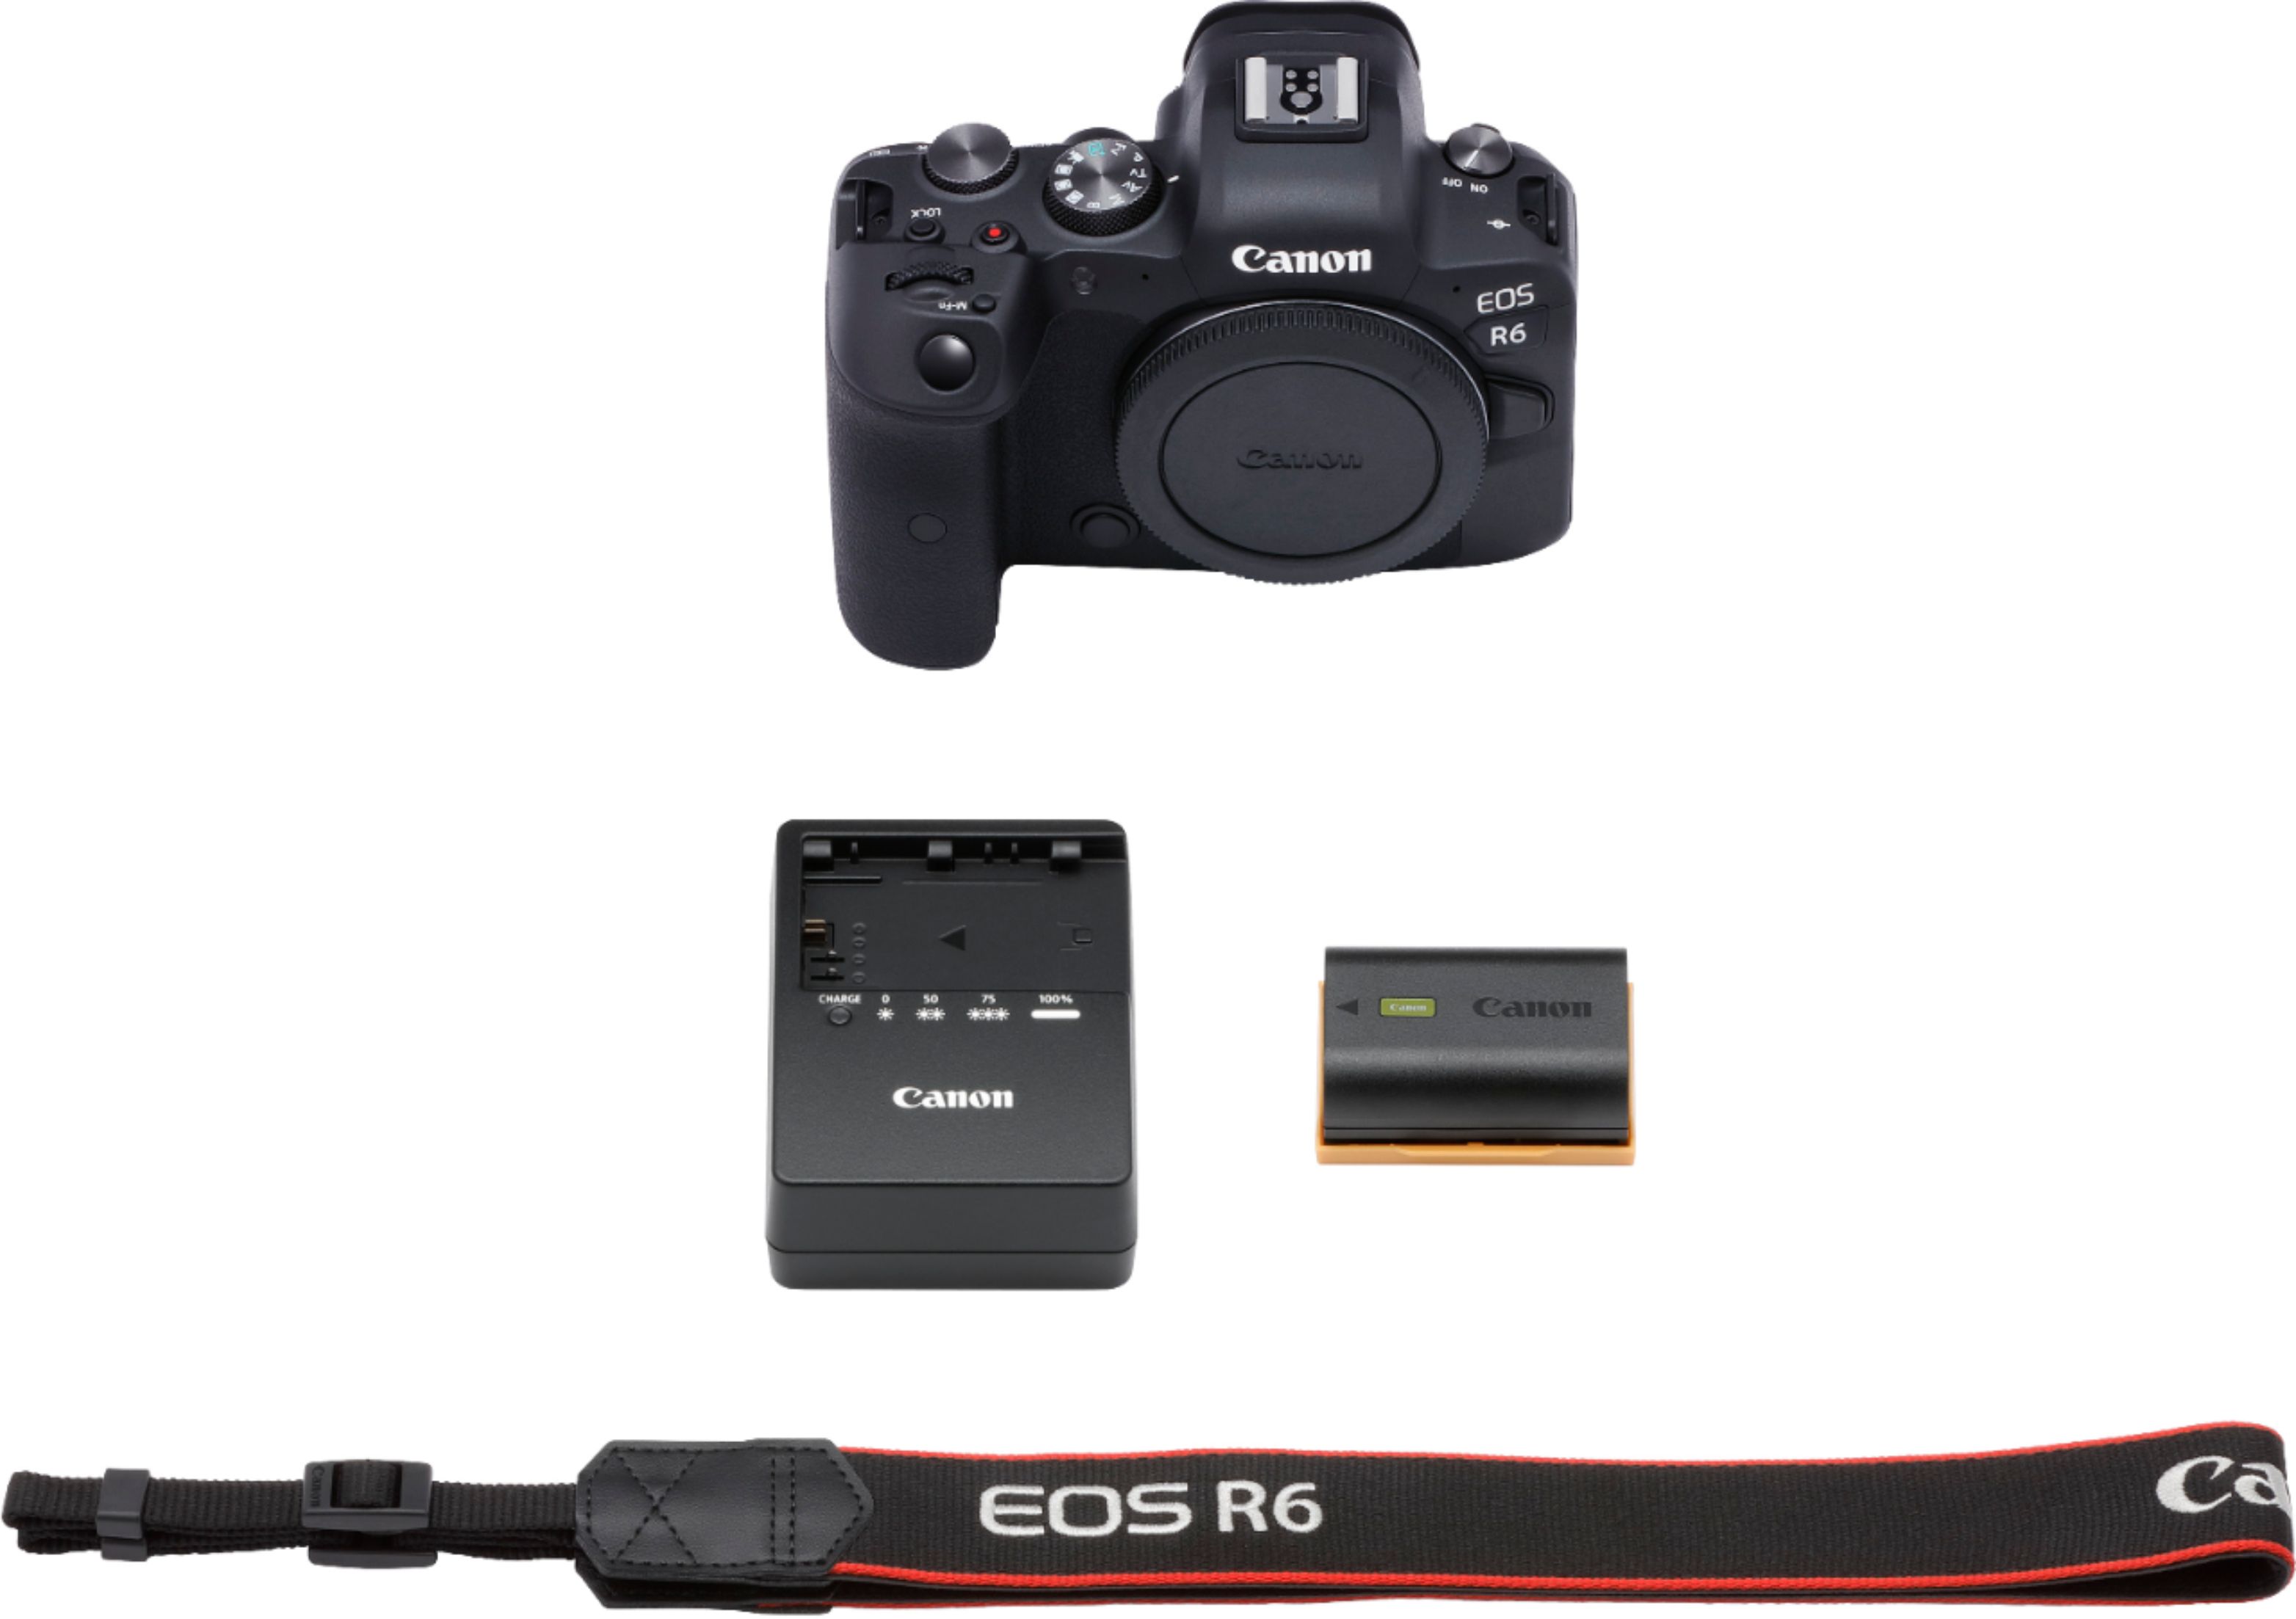 Mirrorless Black Buy: Best R6 EOS Camera Only) Canon 4082C002 (Body